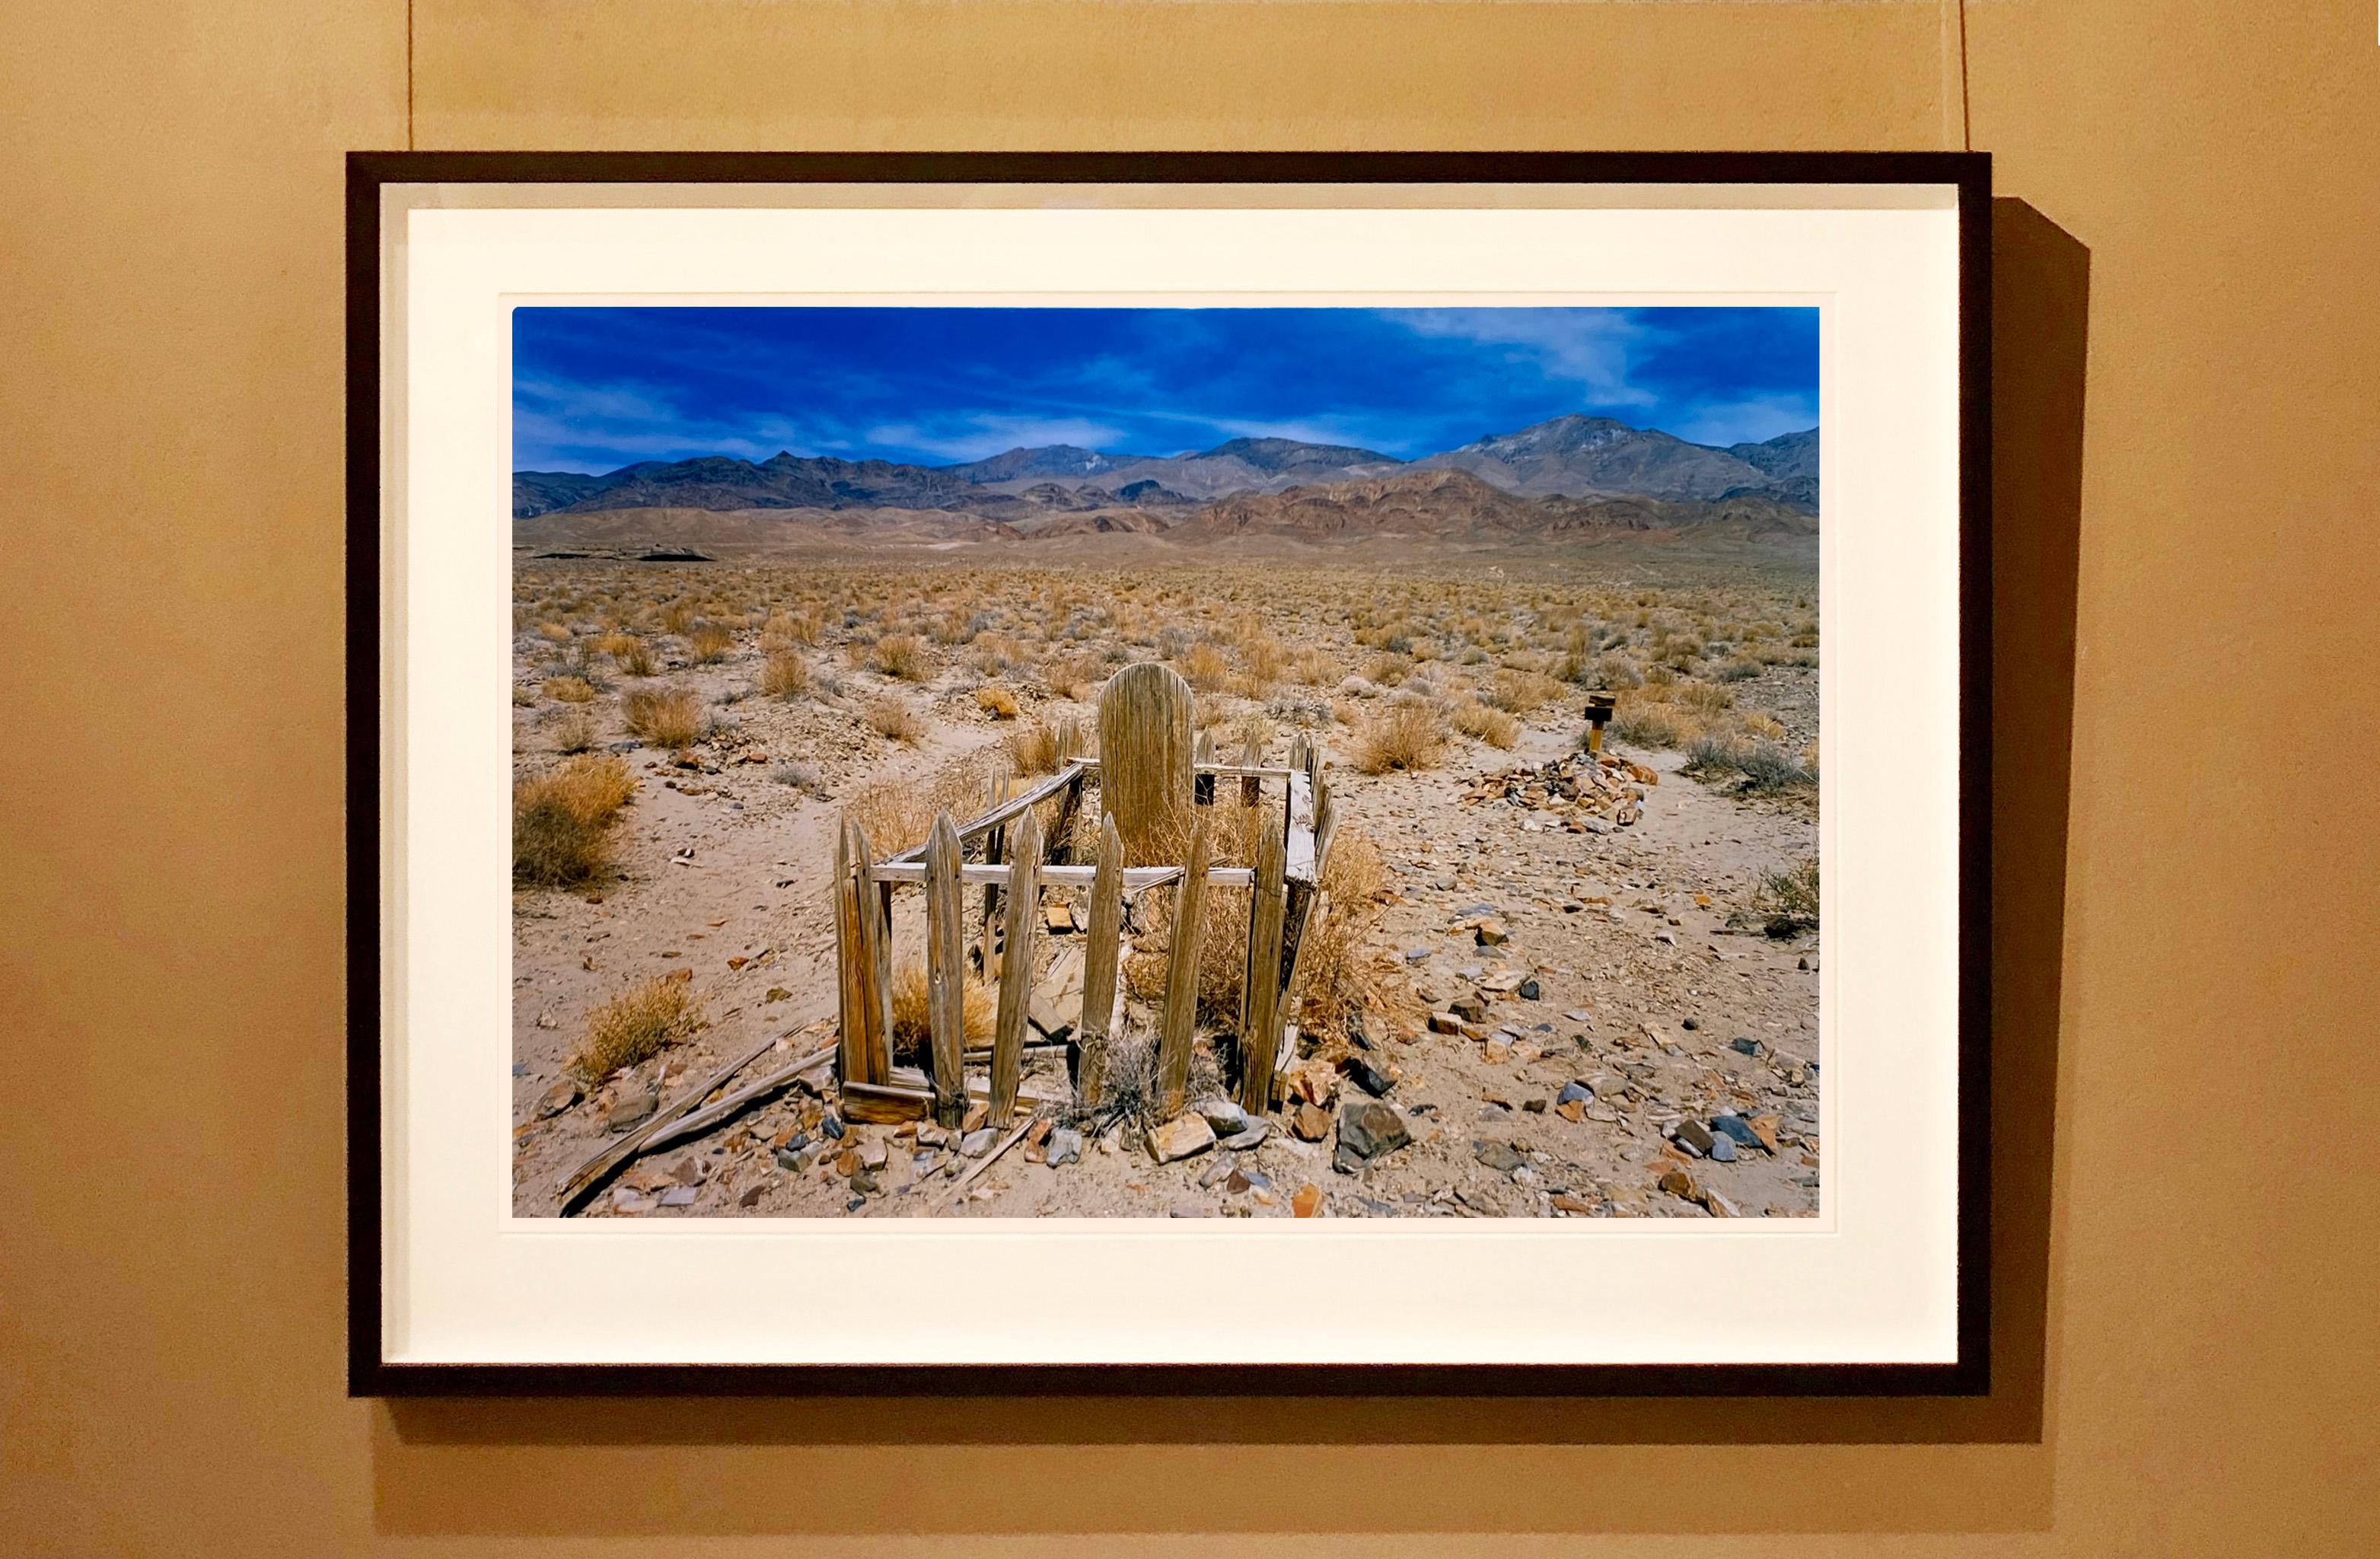 Pioneer's Grave I, Keeler, Inyo County, California - American Landscape Photo - Contemporary Photograph by Richard Heeps